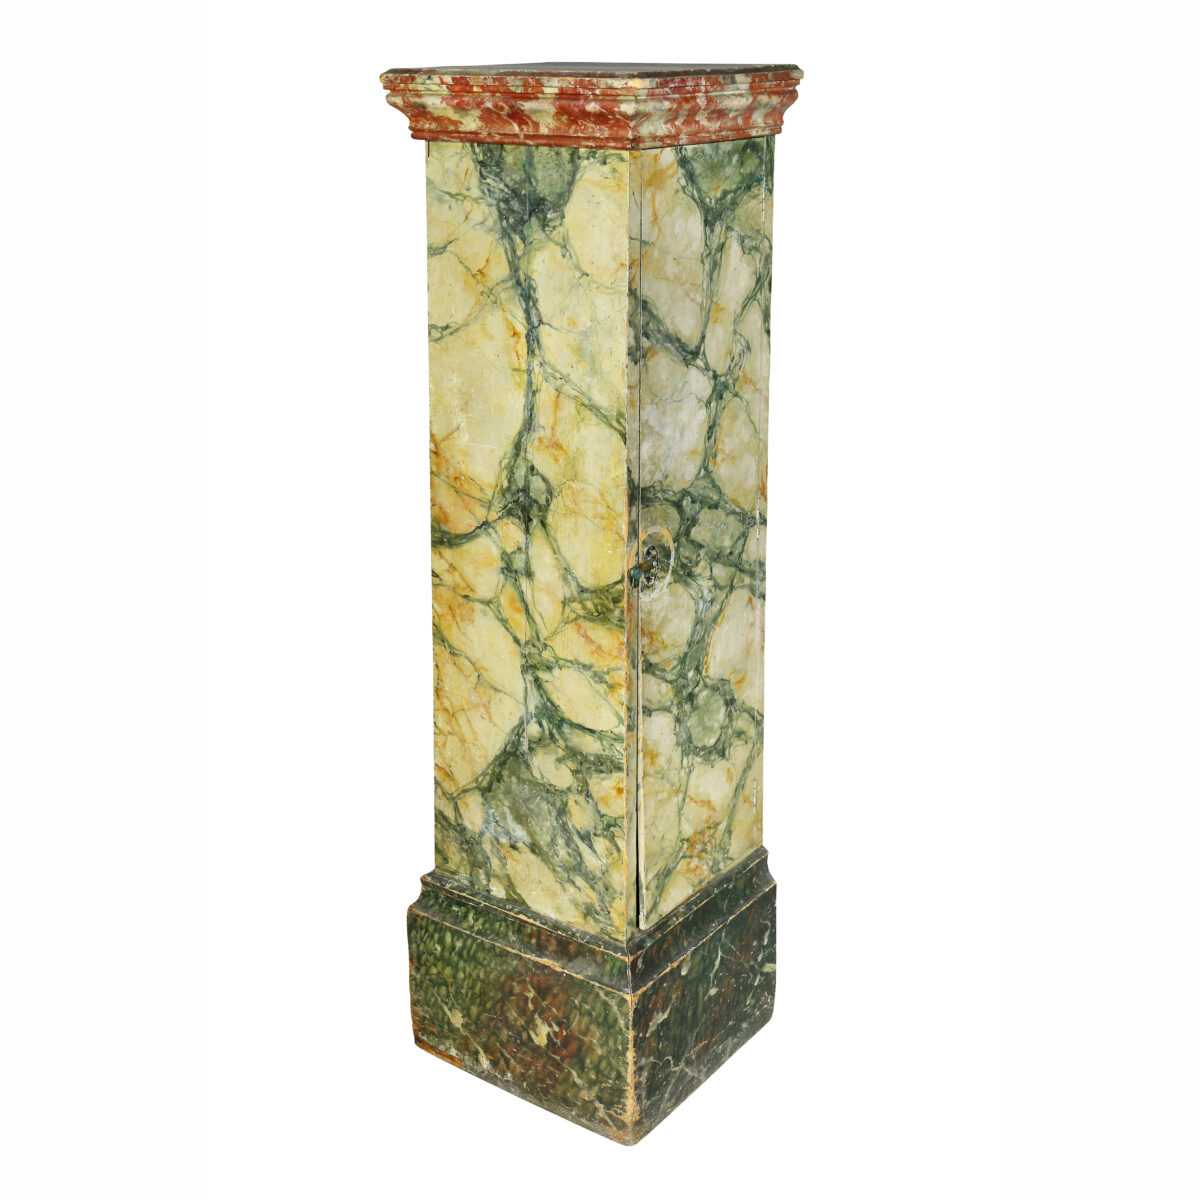 Faux Marble Painted Wood Pedestal or Cabinet.